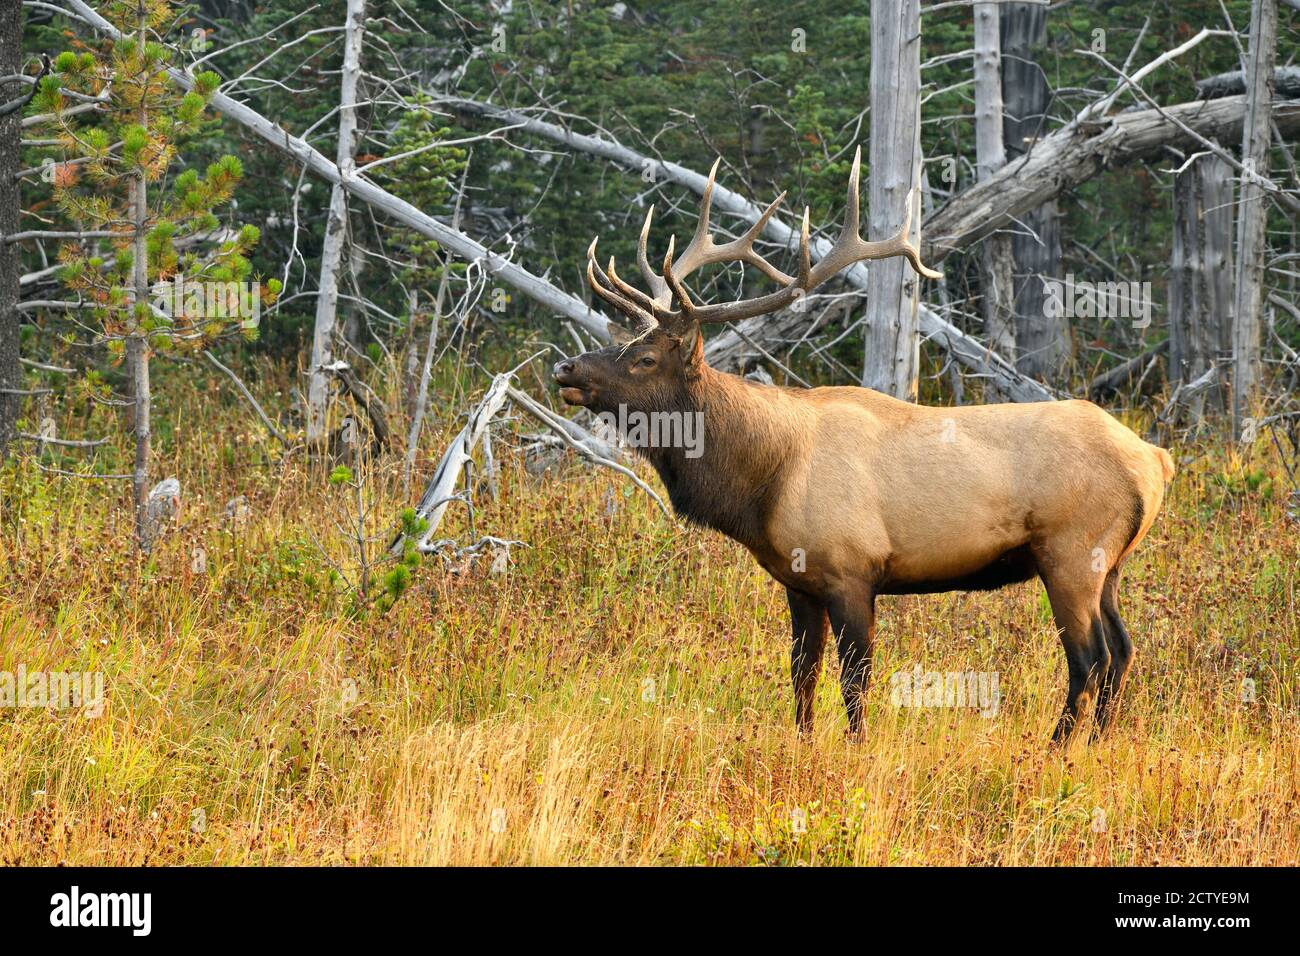 A wild bull elk "Cervus alaphus", stopping to call from a wooded area in rural Alberta Canada. Stock Photo